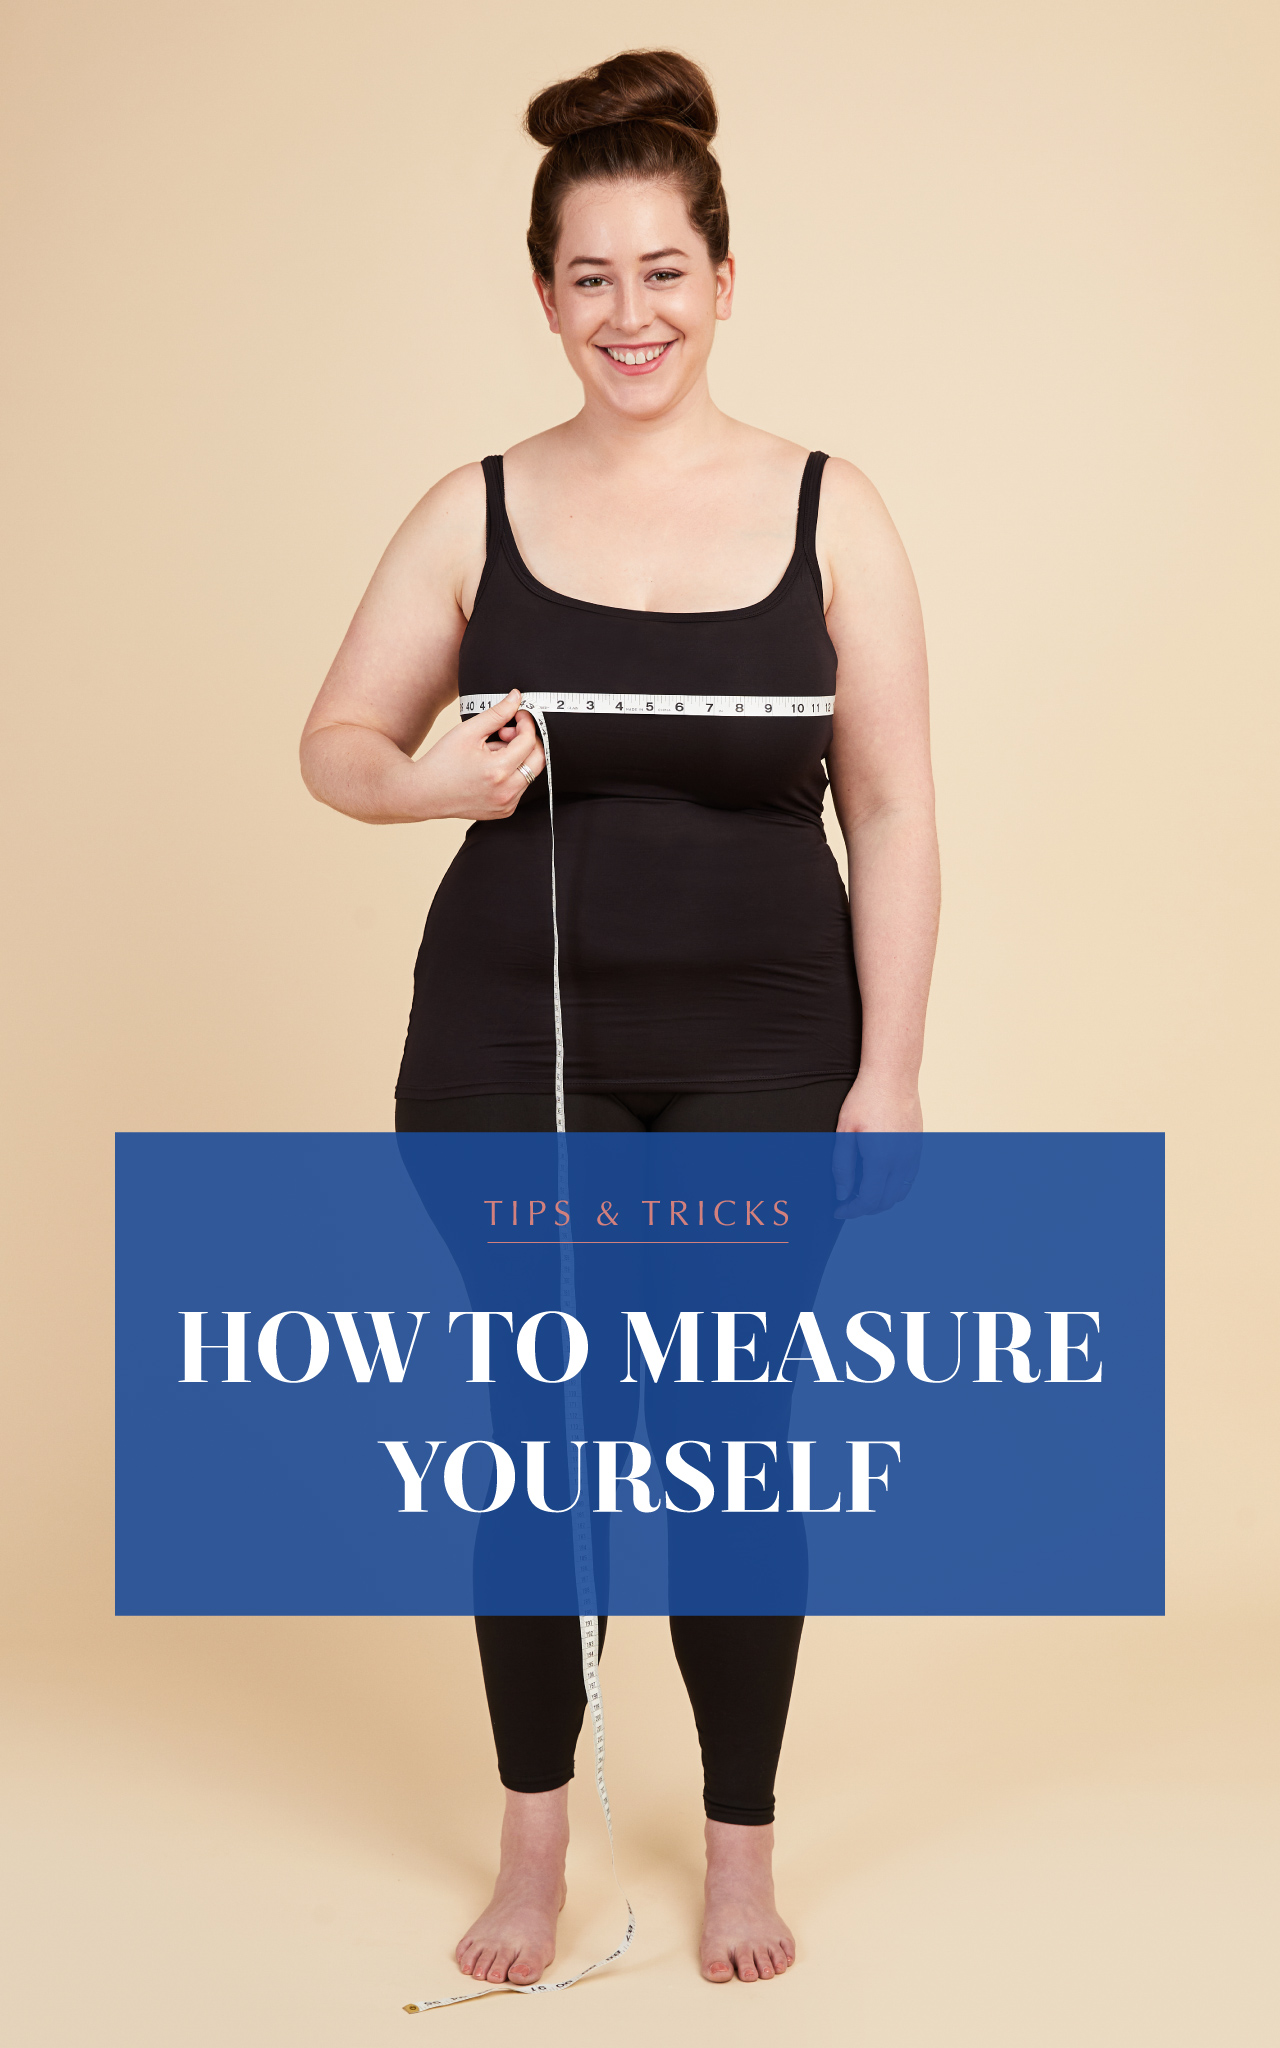 Body measurements. Ten body measurements for the cloth-skin